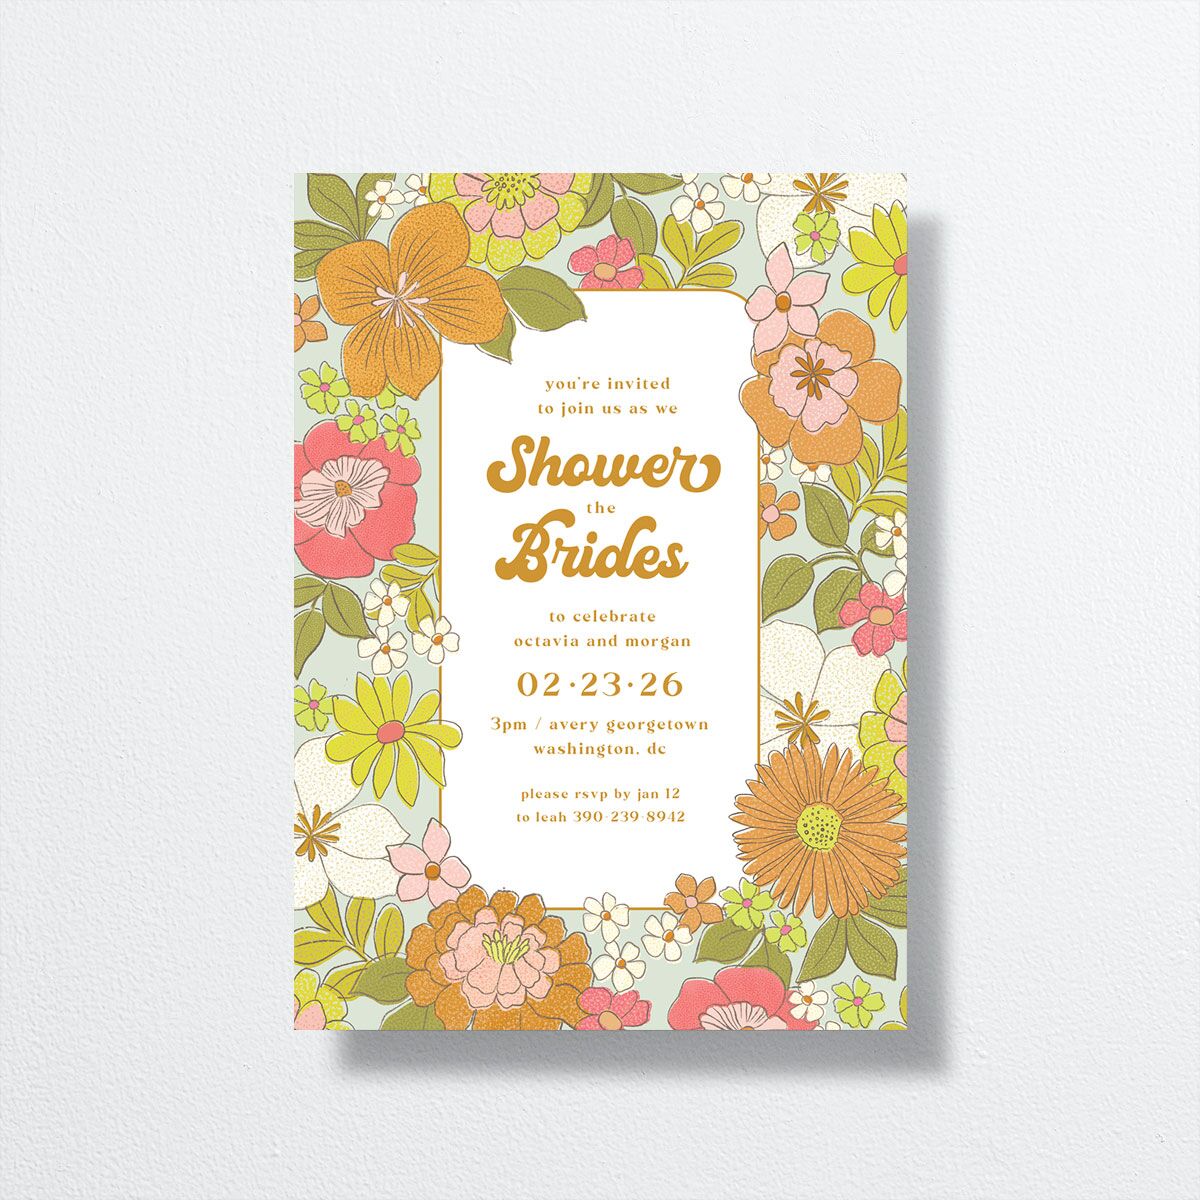 Groovy Blooms Bridal Shower Invitations front